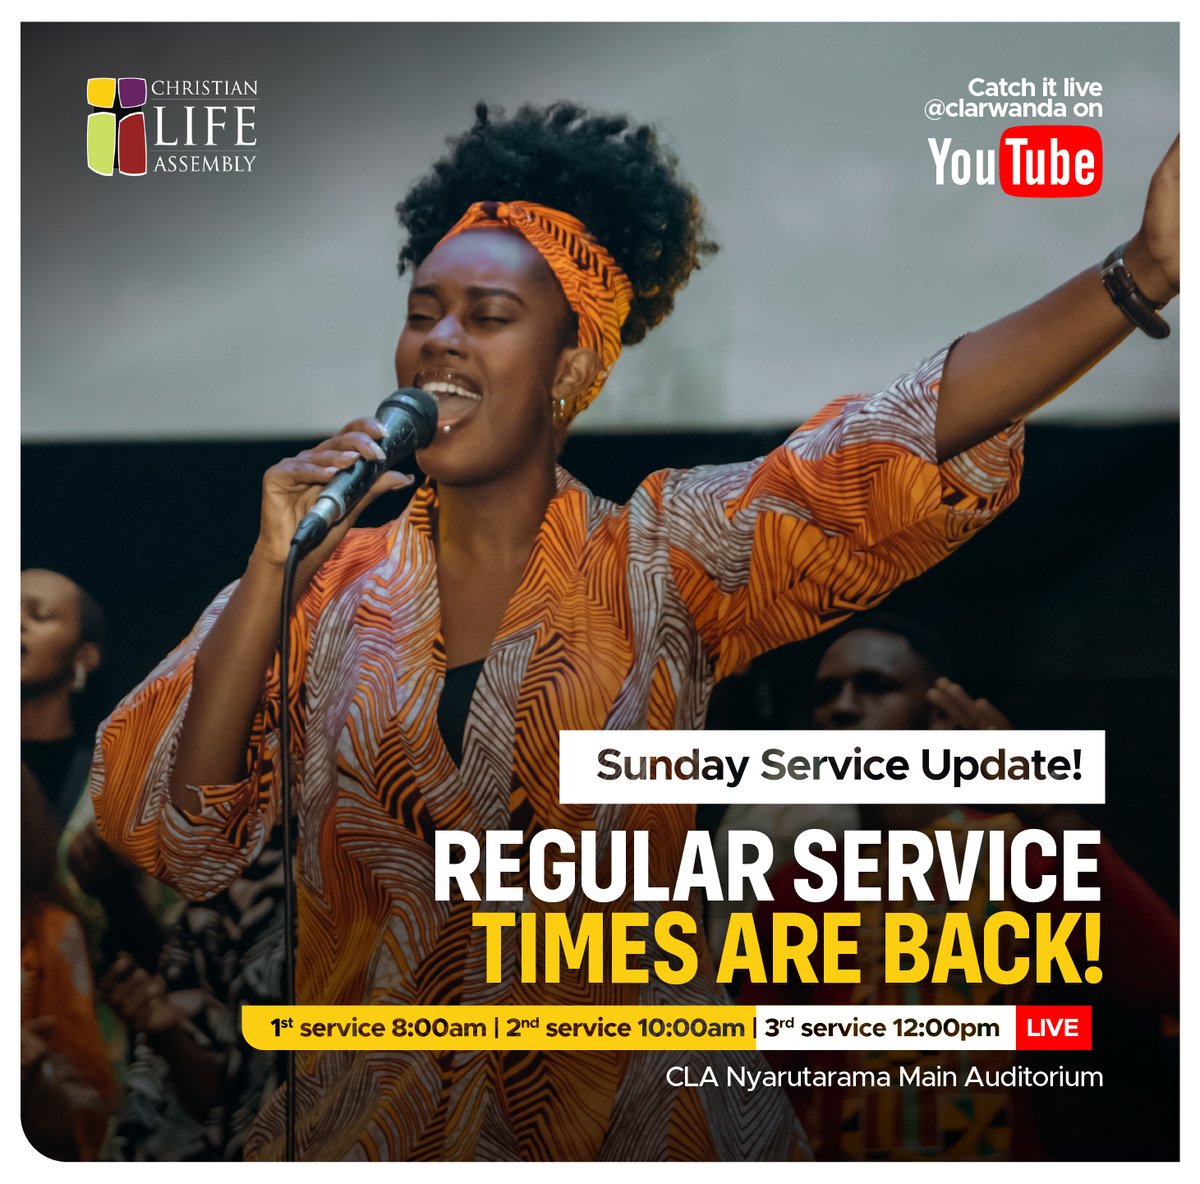 Join us for Sunday Service today in the House of The Lord. We are live at midday CAT. #sundayservice #lightsshinebright